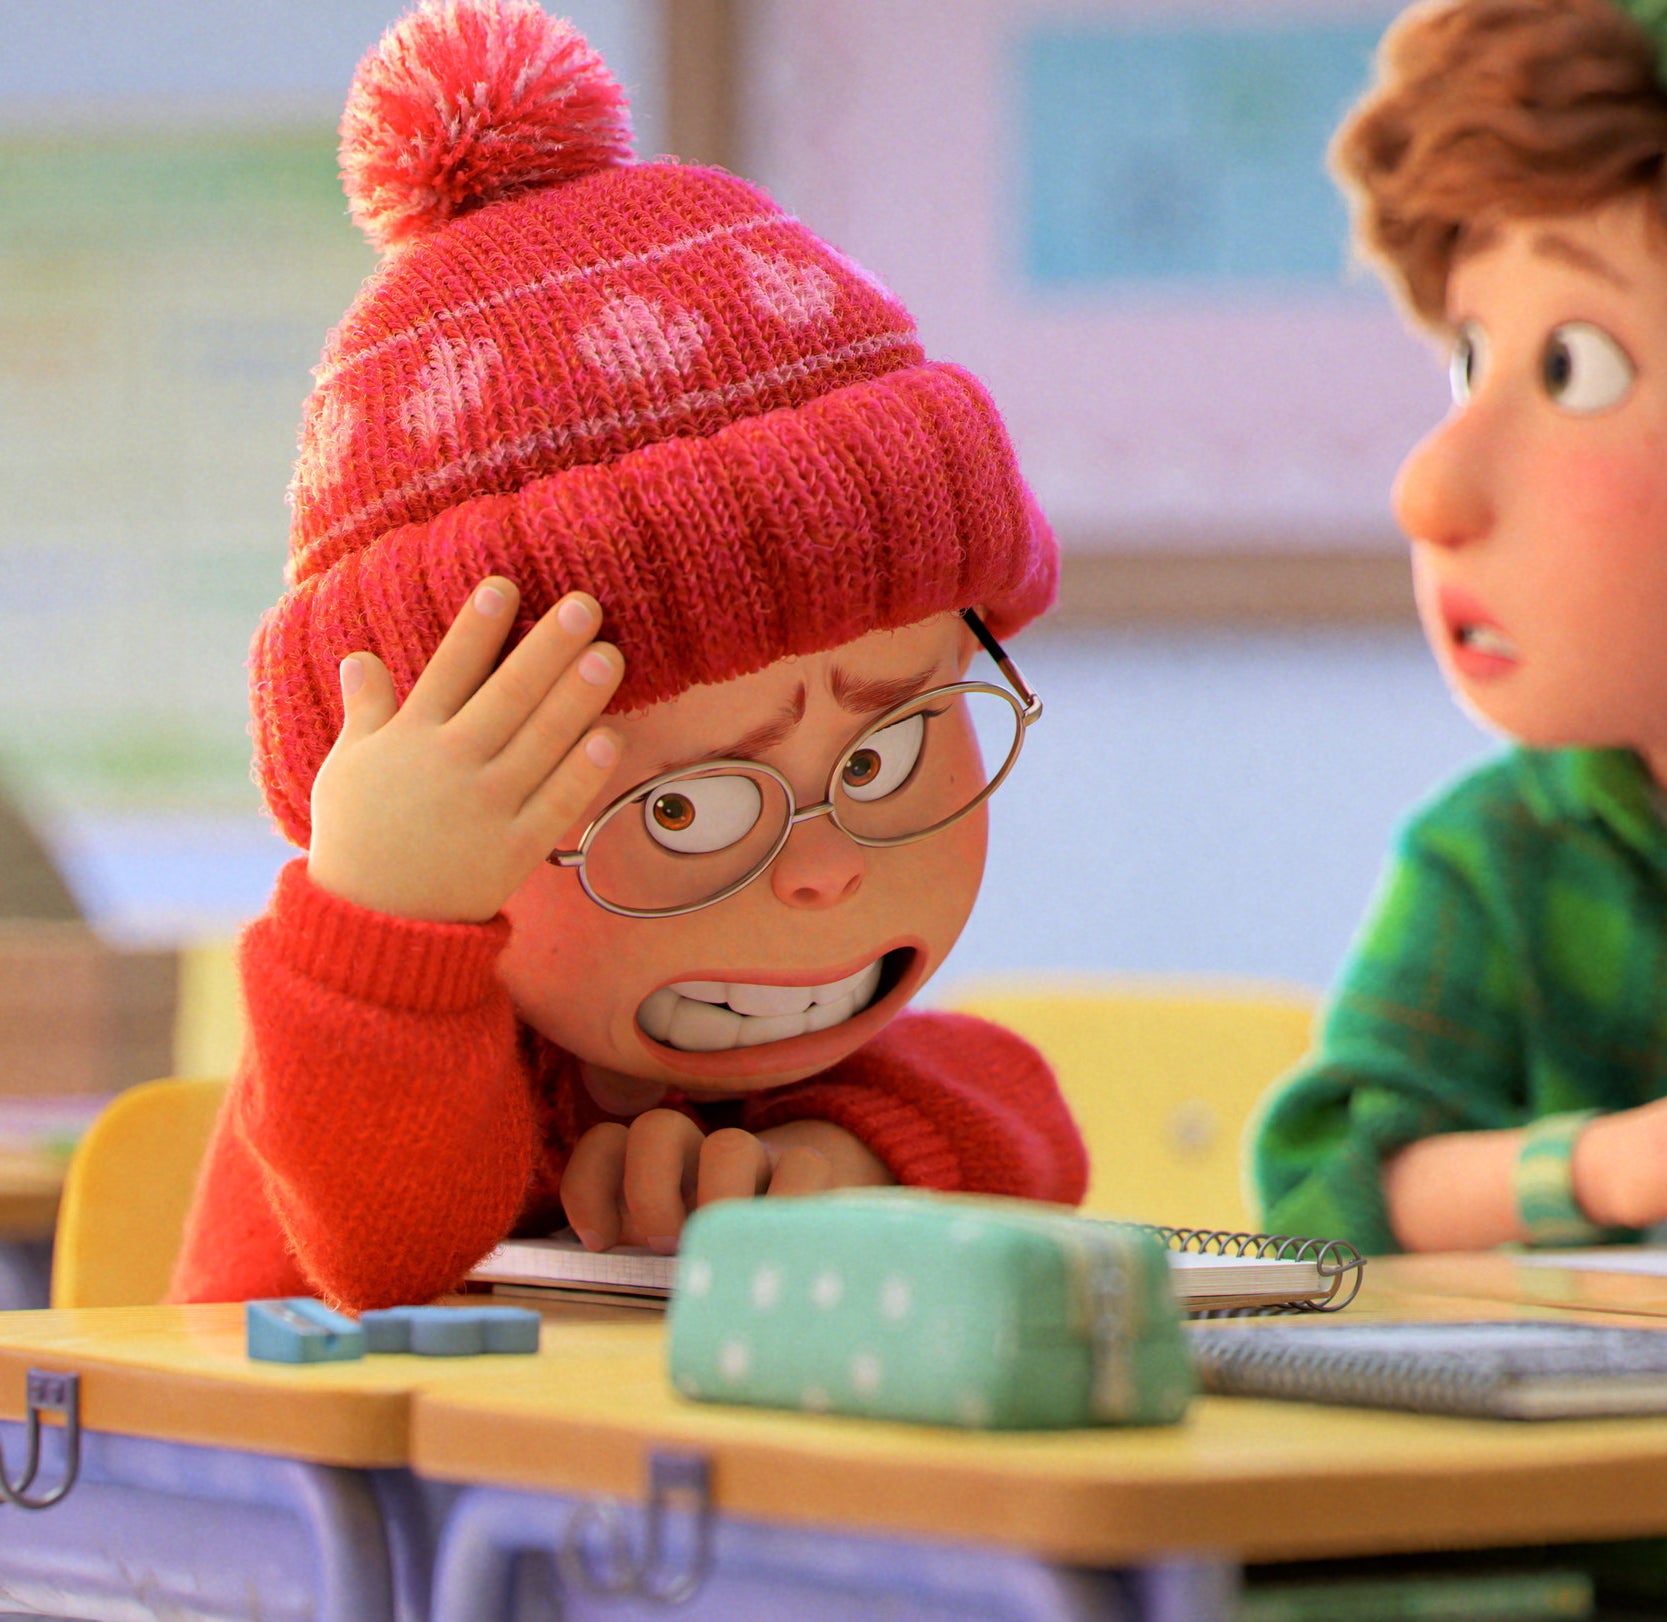 The main character sitting at her desk in school wearing a Canadian toque and looking embarrassed